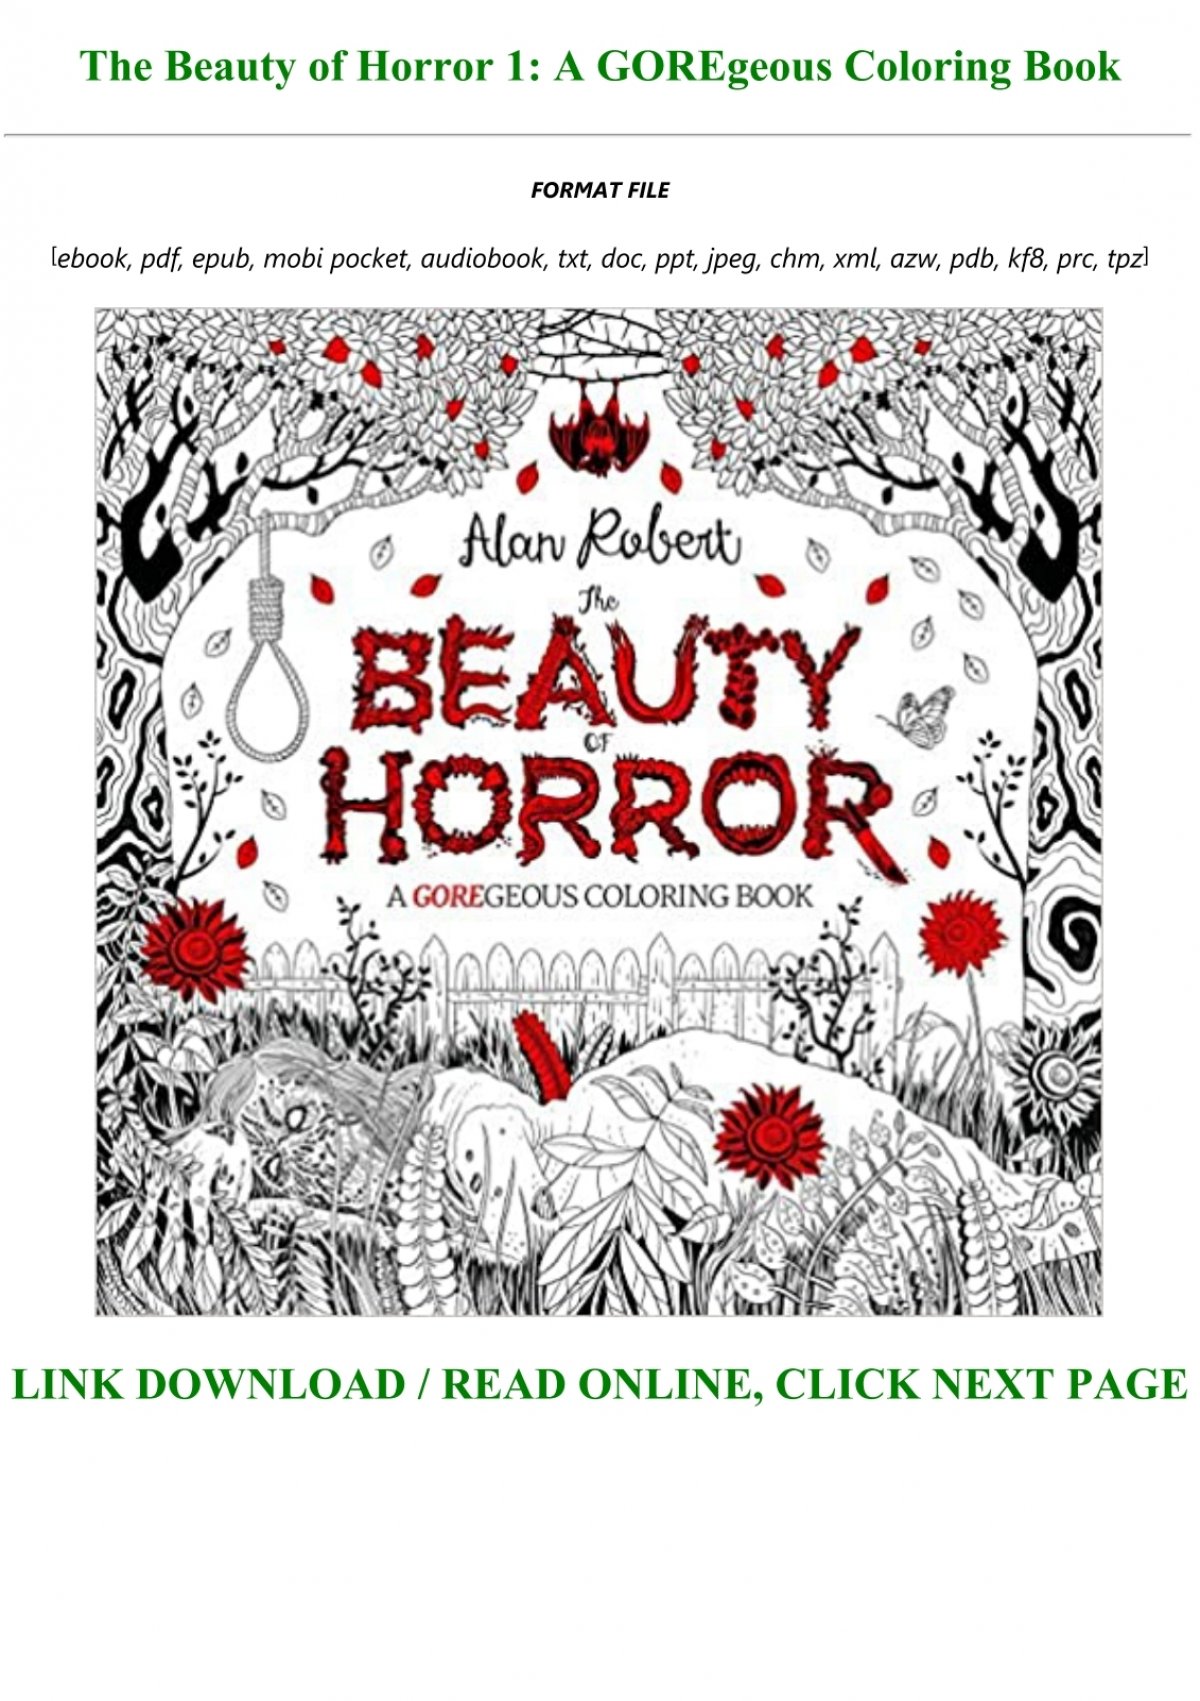 Download Ebook Reading The Beauty Of Horror 1 A Goregeous Coloring Book Txt Pdf Epub